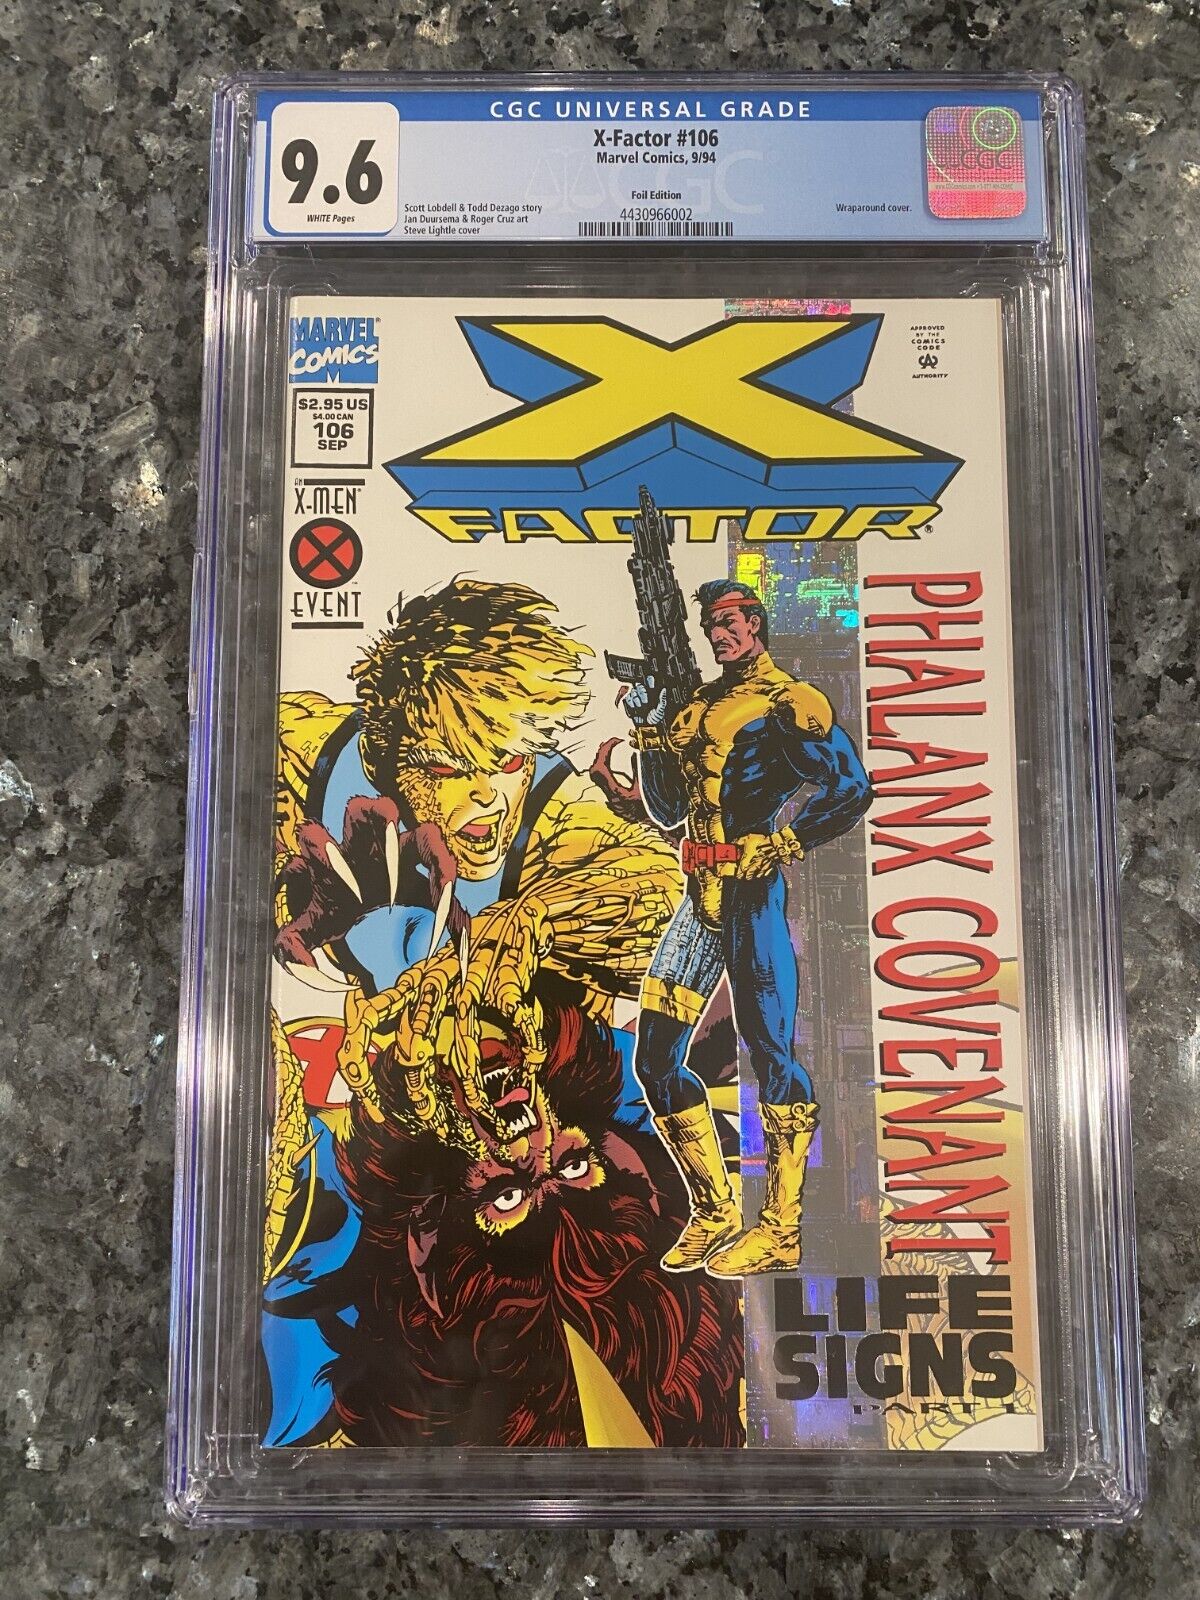 Epic Battle: X-Factor #106 Foil Edition - CGC 9.6 White Pages - Wraparound Cover